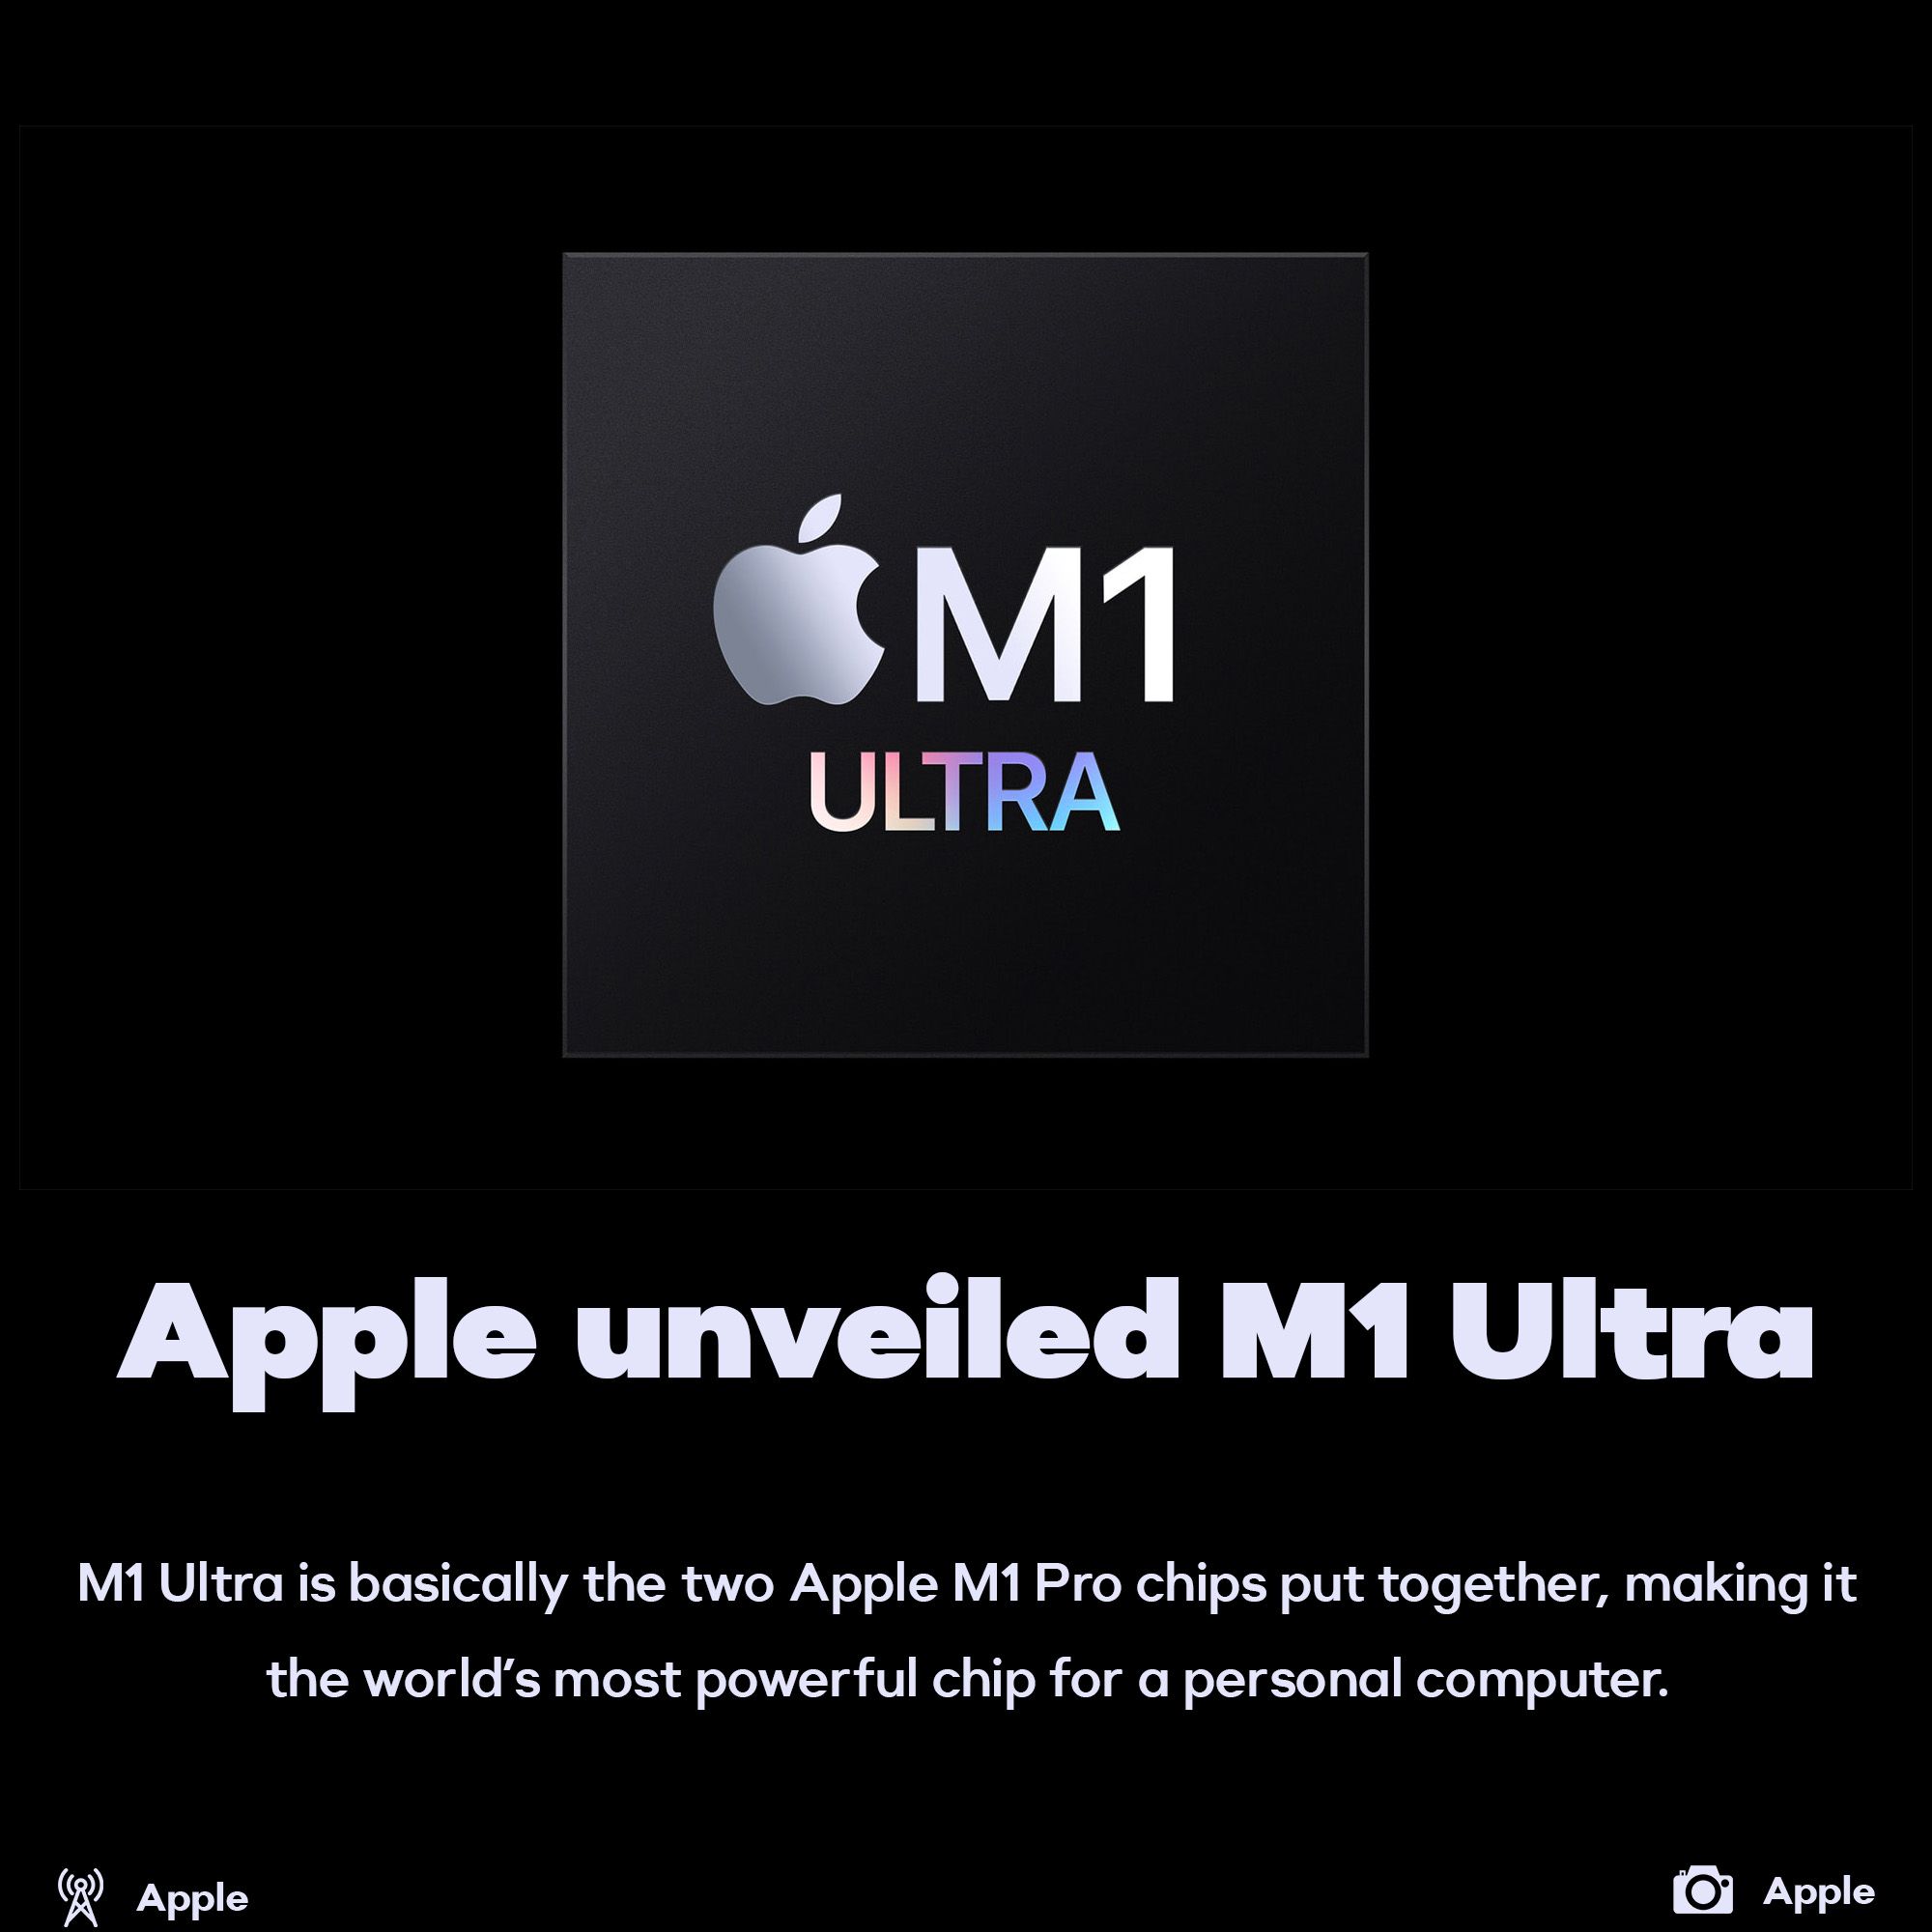 Apple unveiled M1 Ultra chip